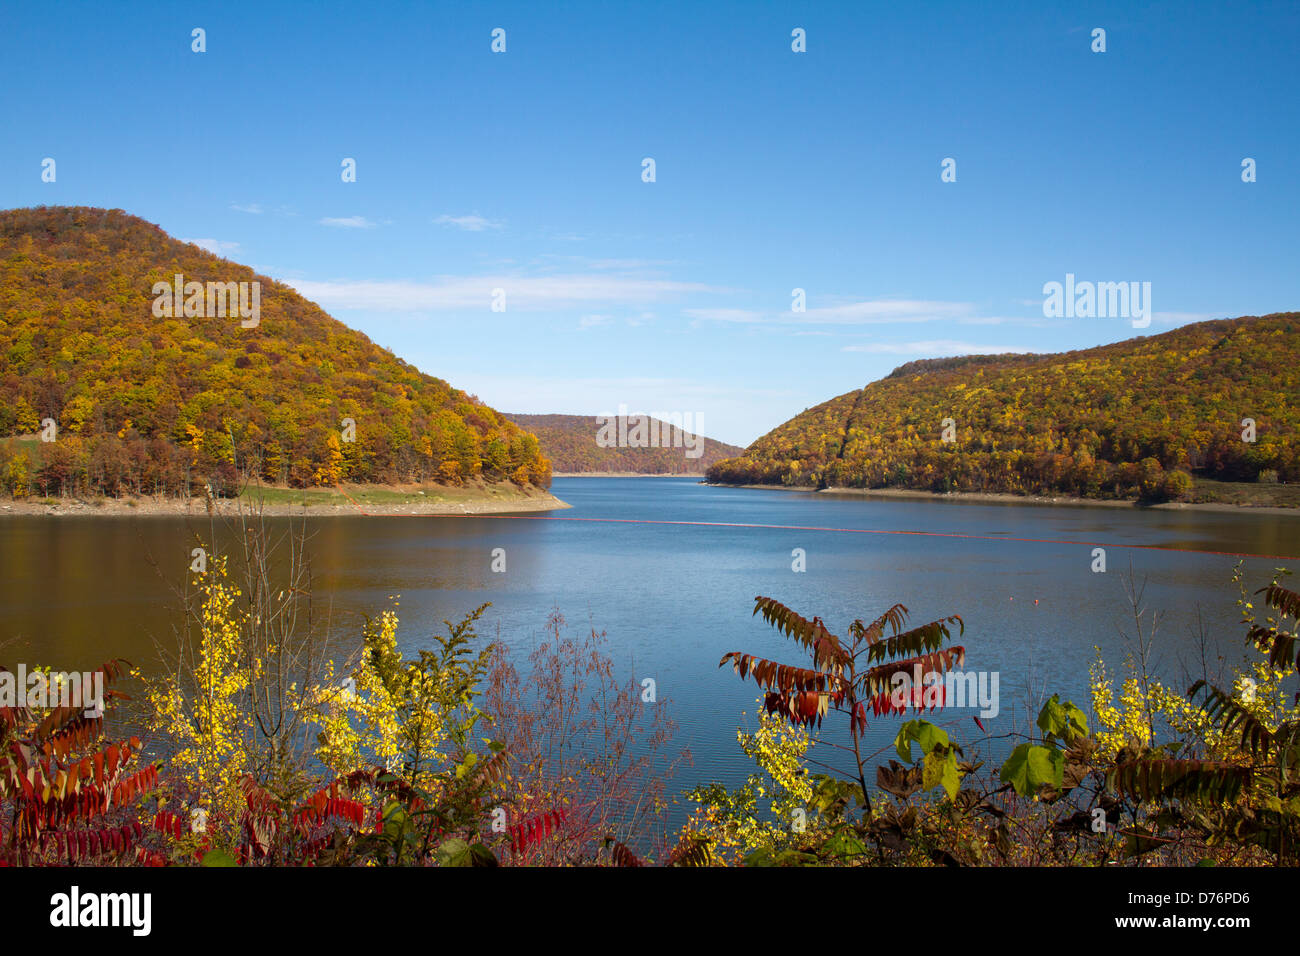 Allegheny reservoir in Pennsylvania in the fall Stock Photo